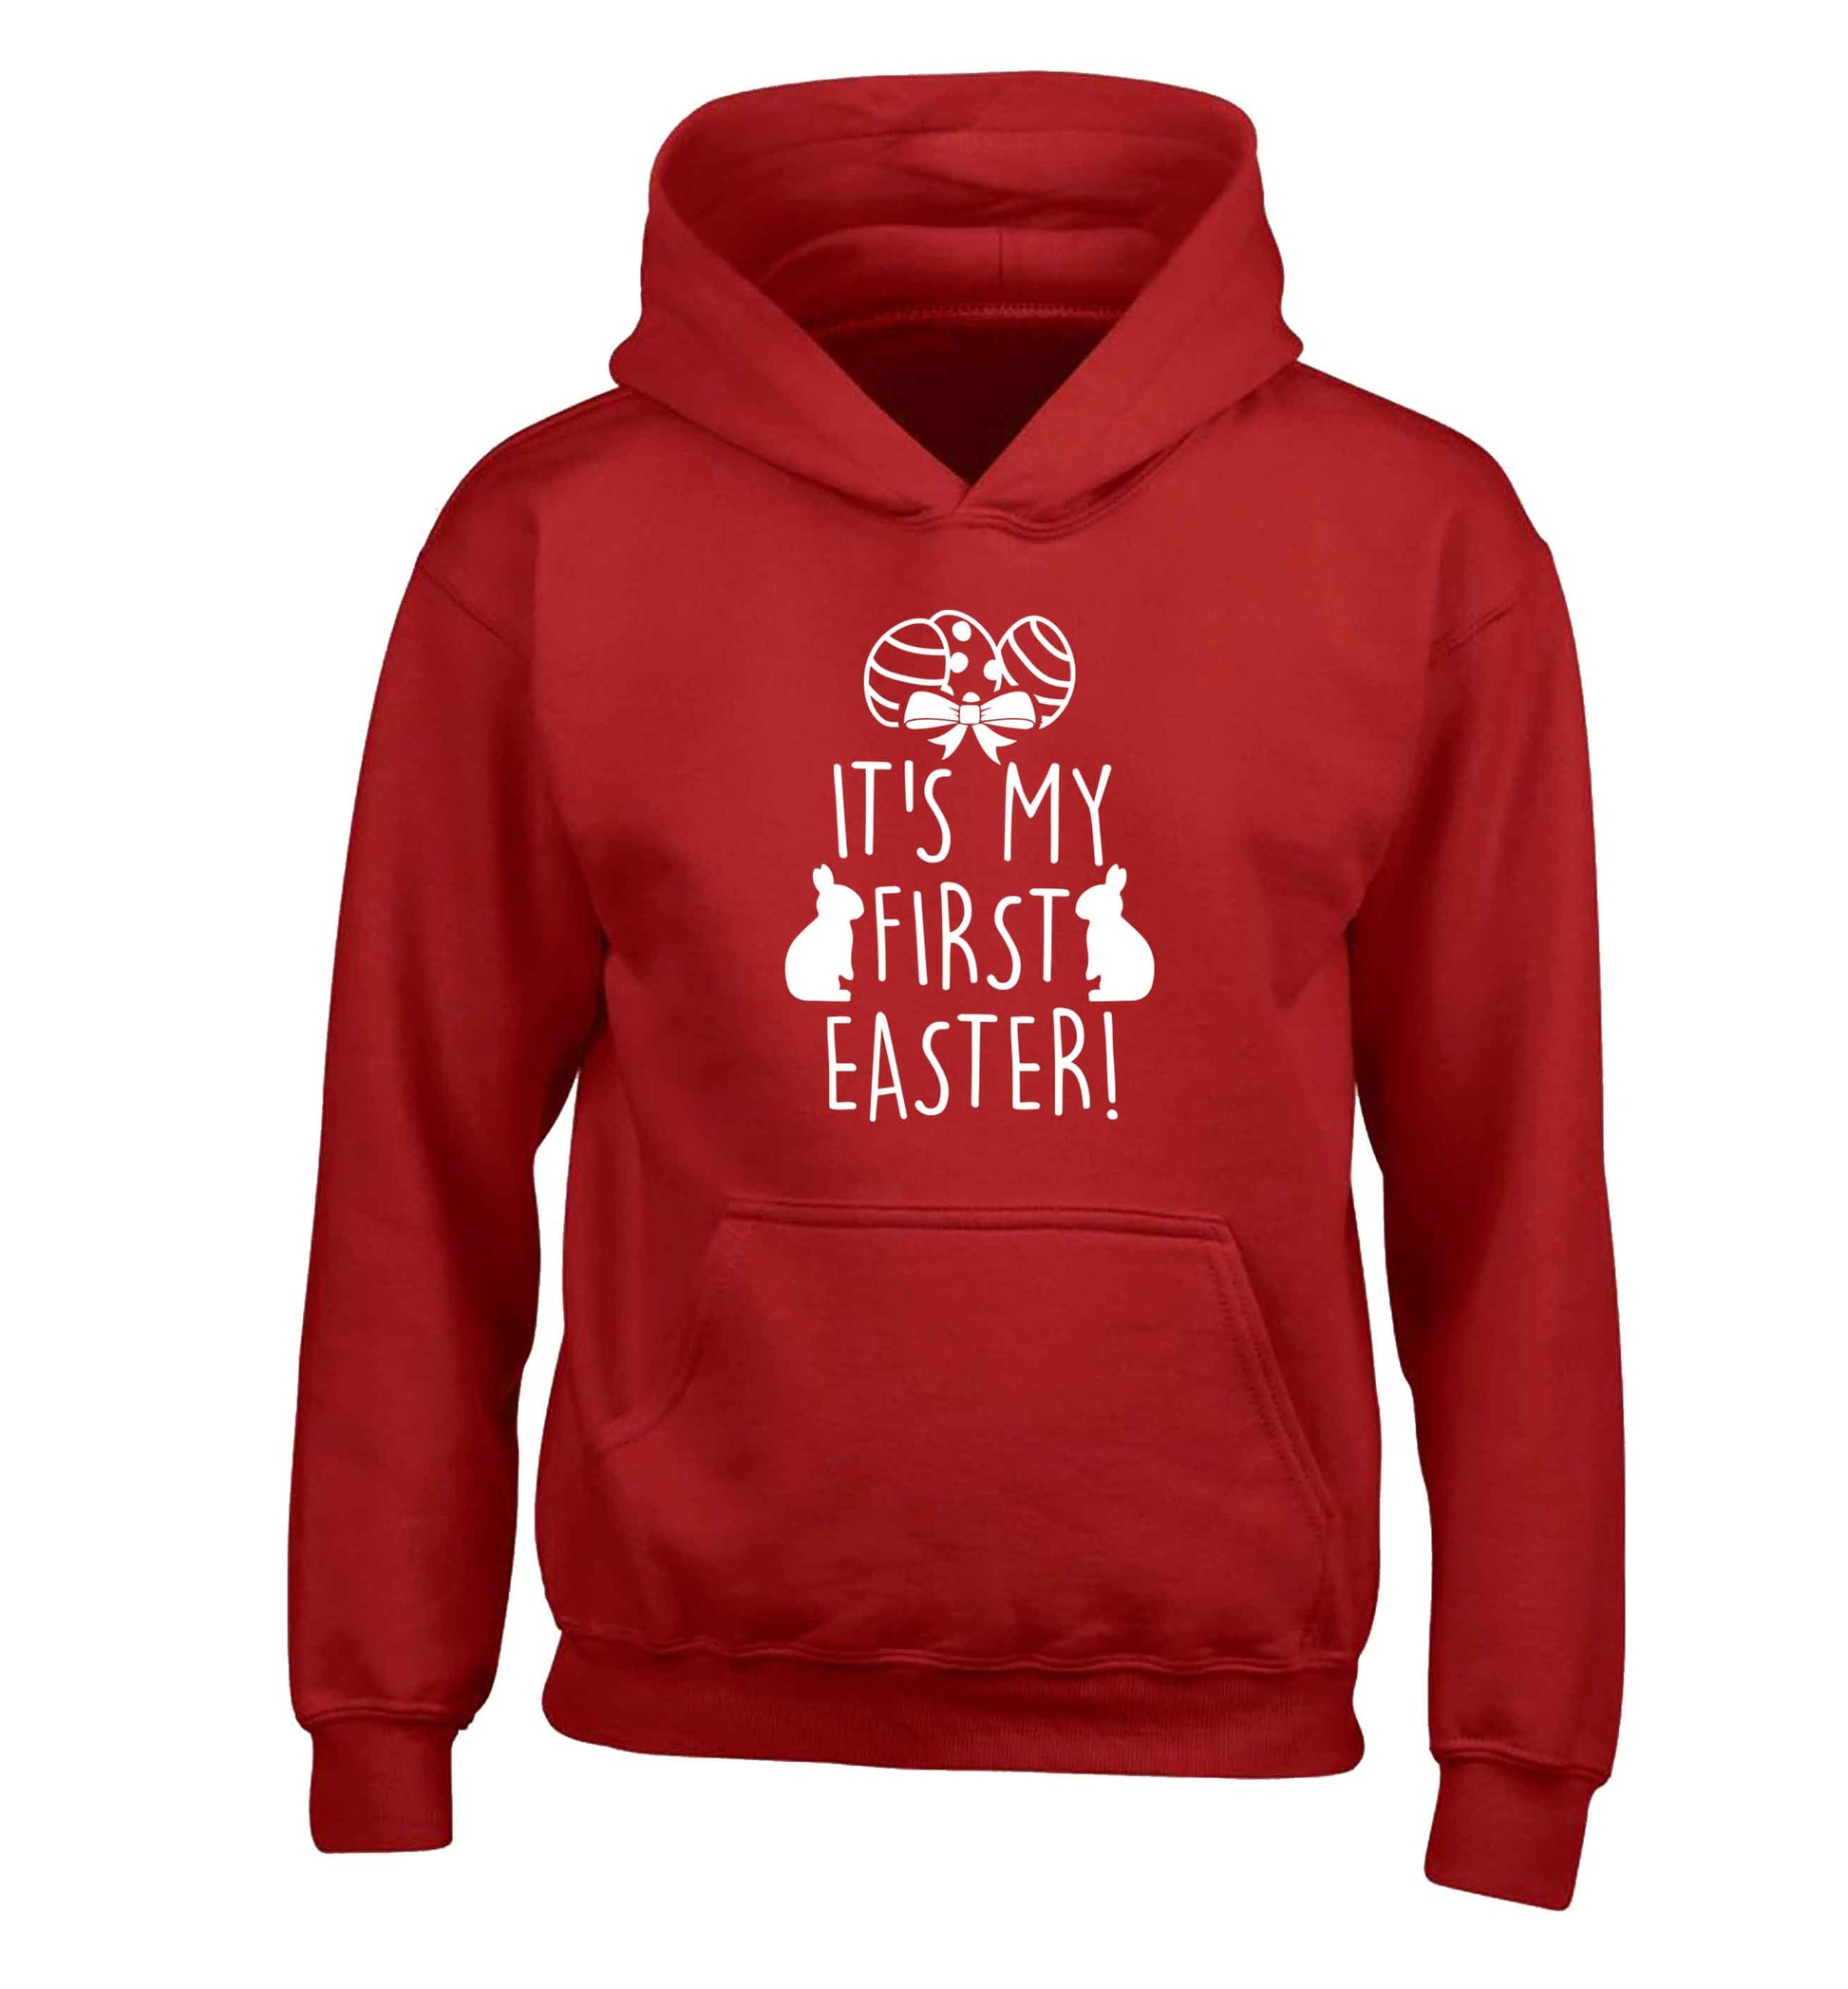 It's my first Easter children's red hoodie 12-13 Years